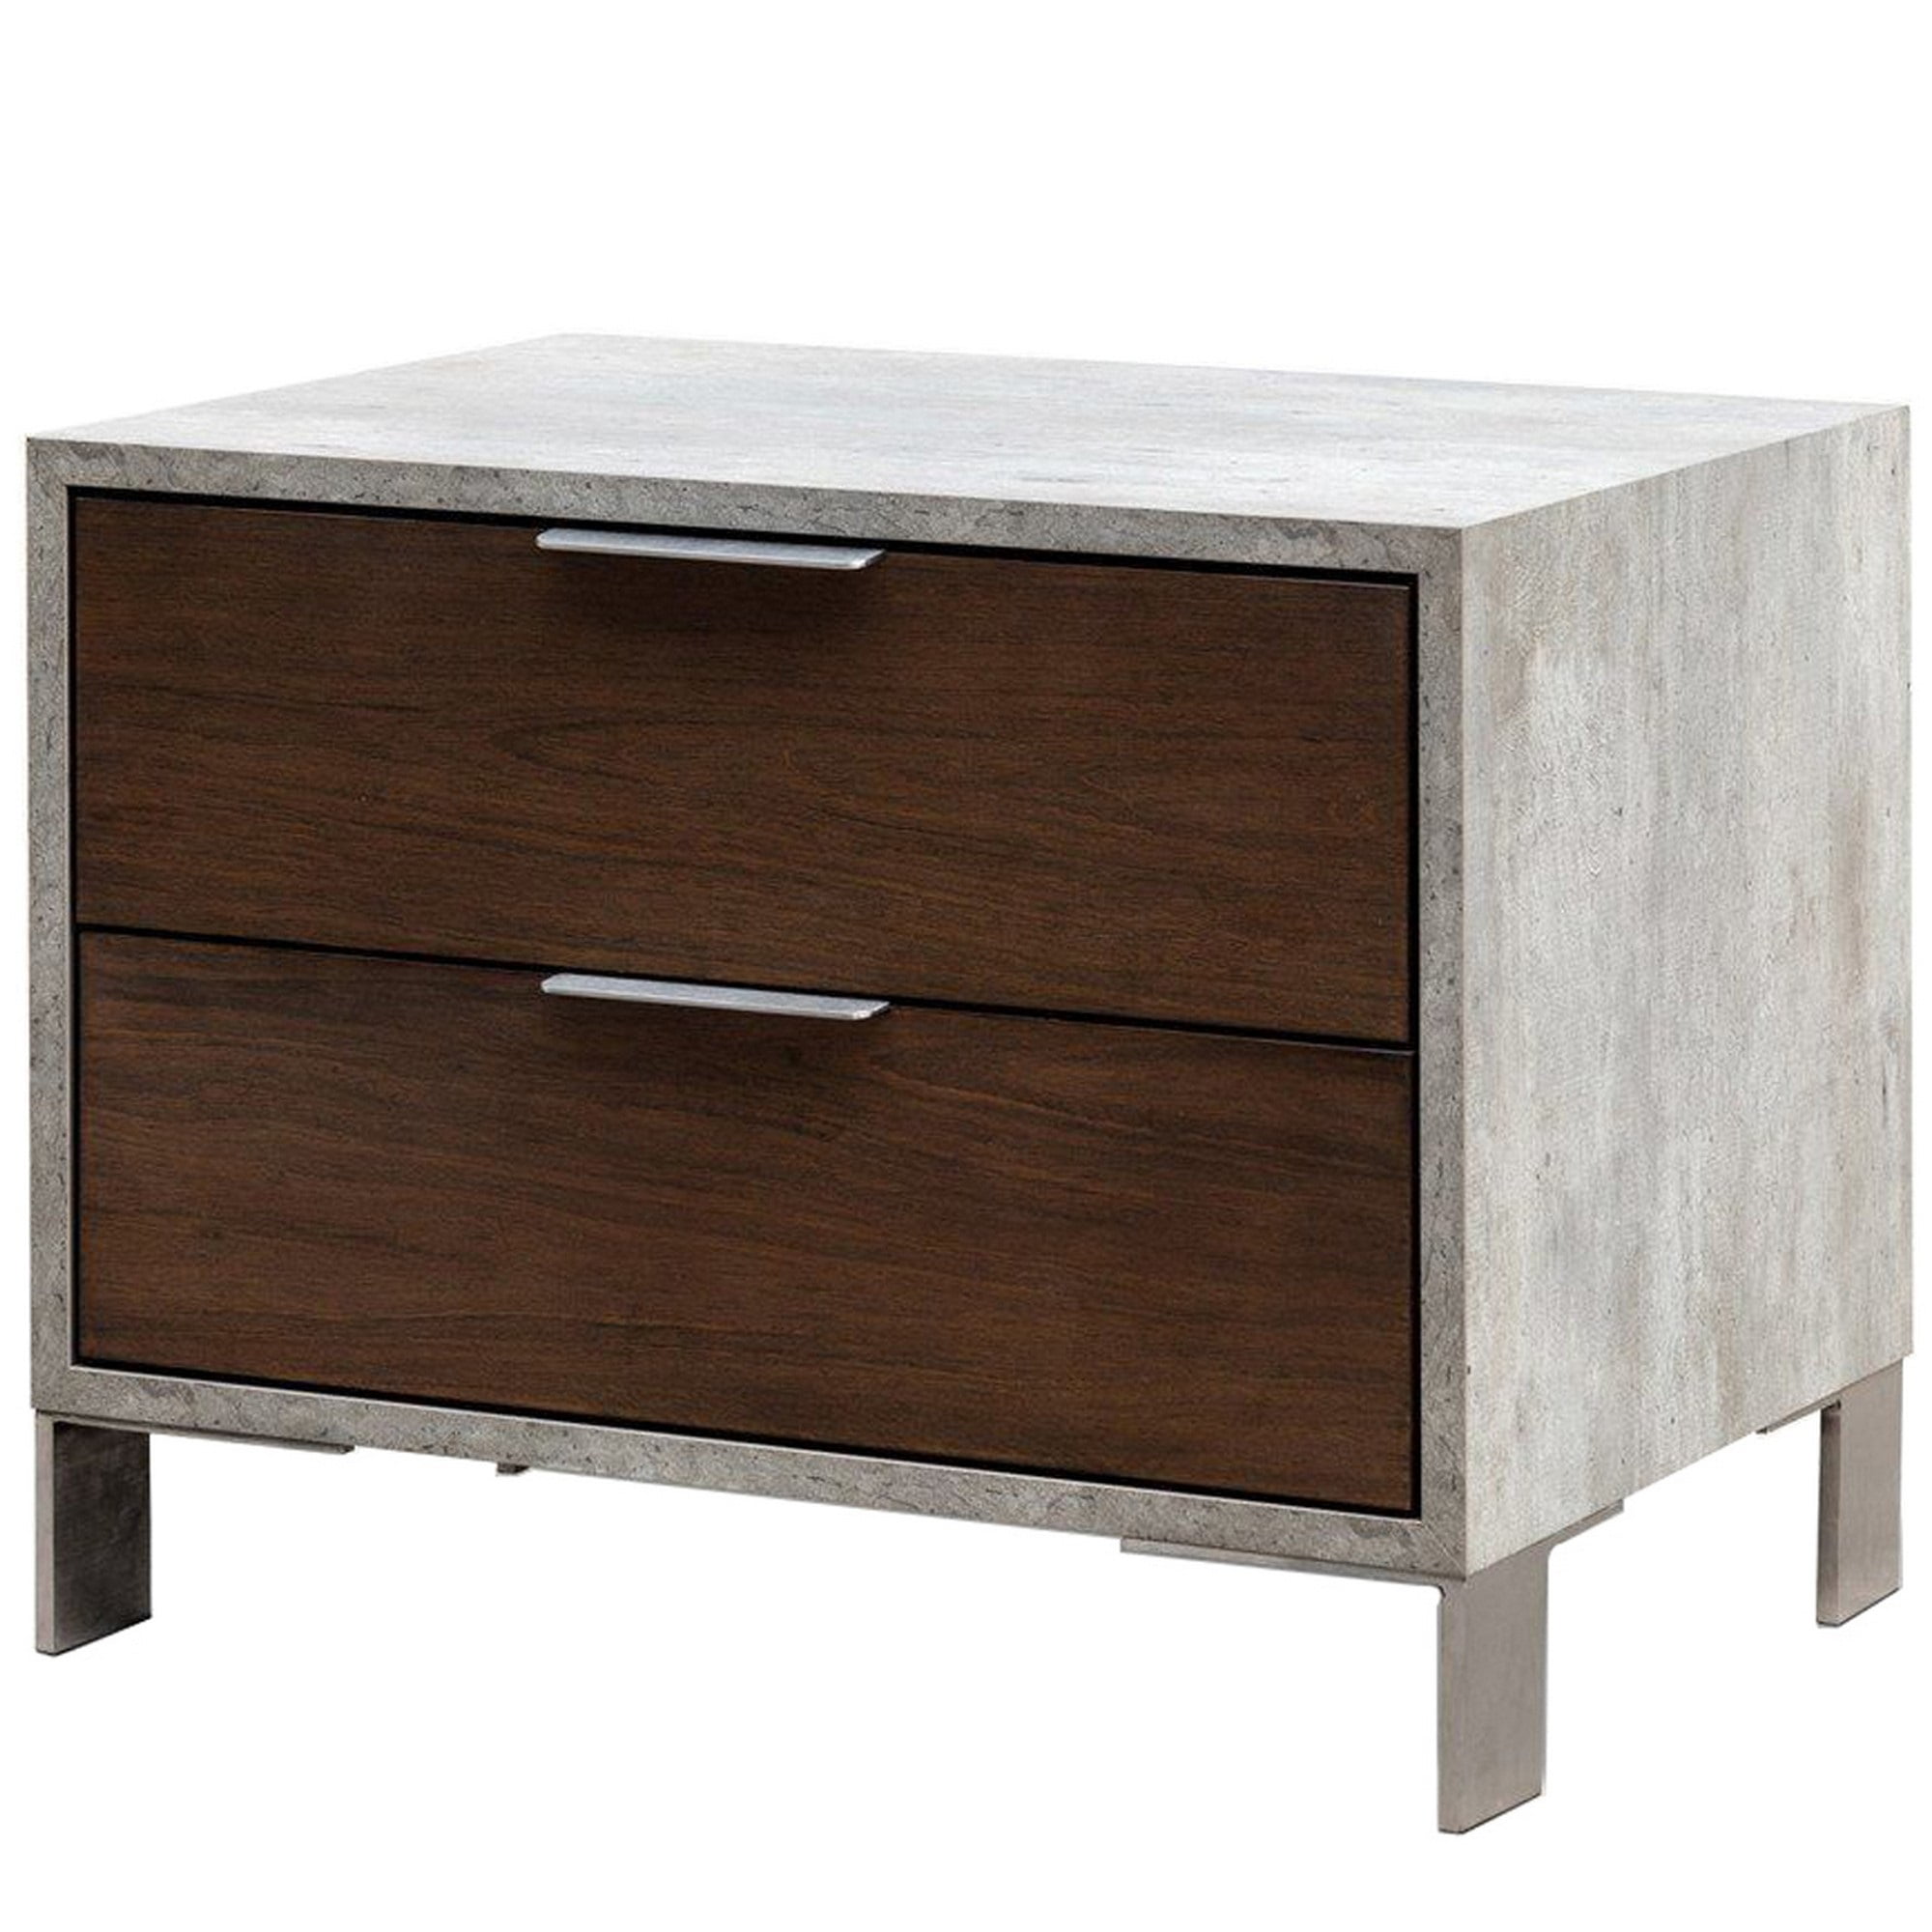 2 Drawer Faux Concrete Nightstand with Metal Legs, Brown and Gray